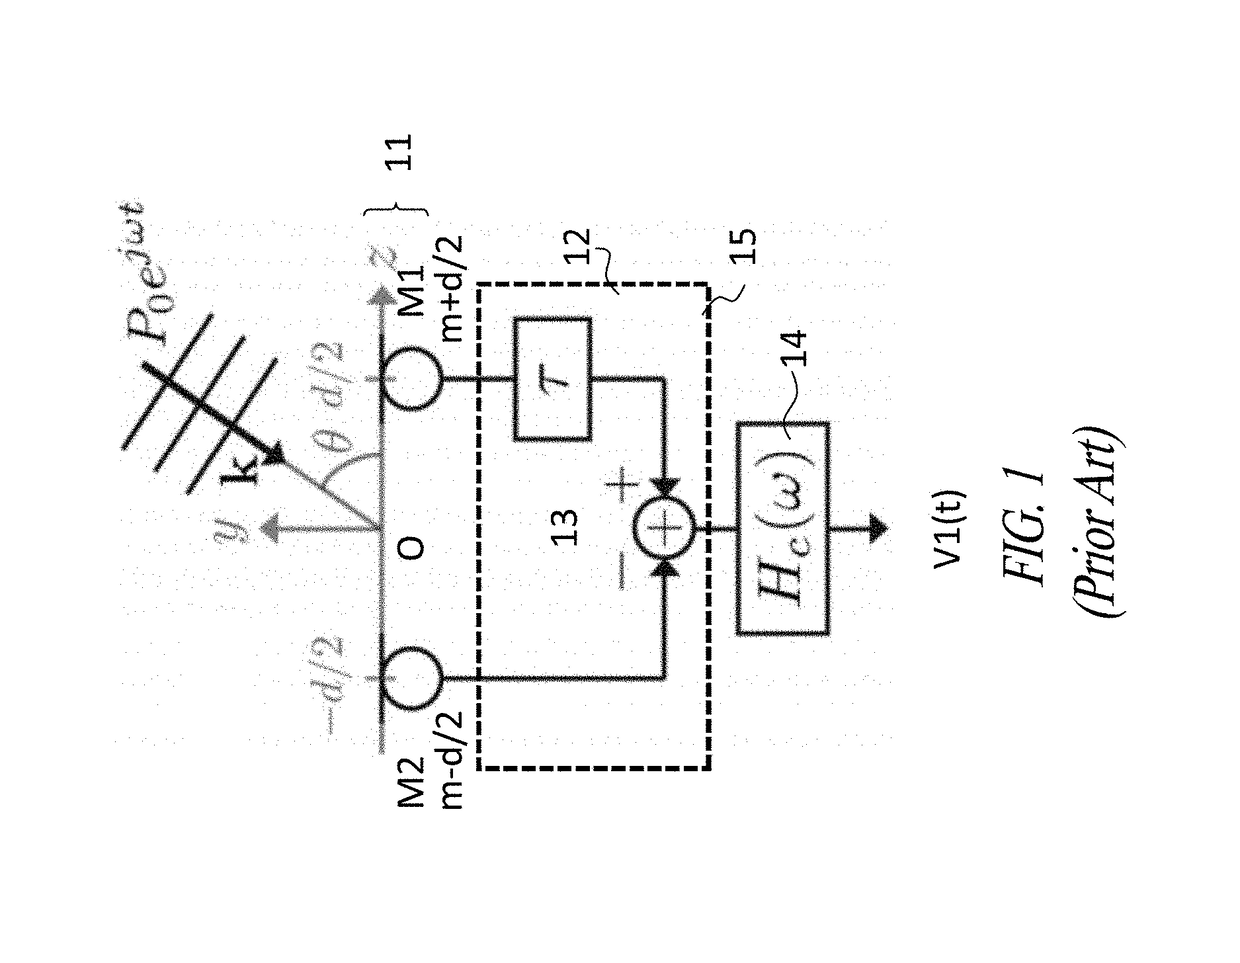 Beamforming method based on arrays of microphones and corresponding apparatus